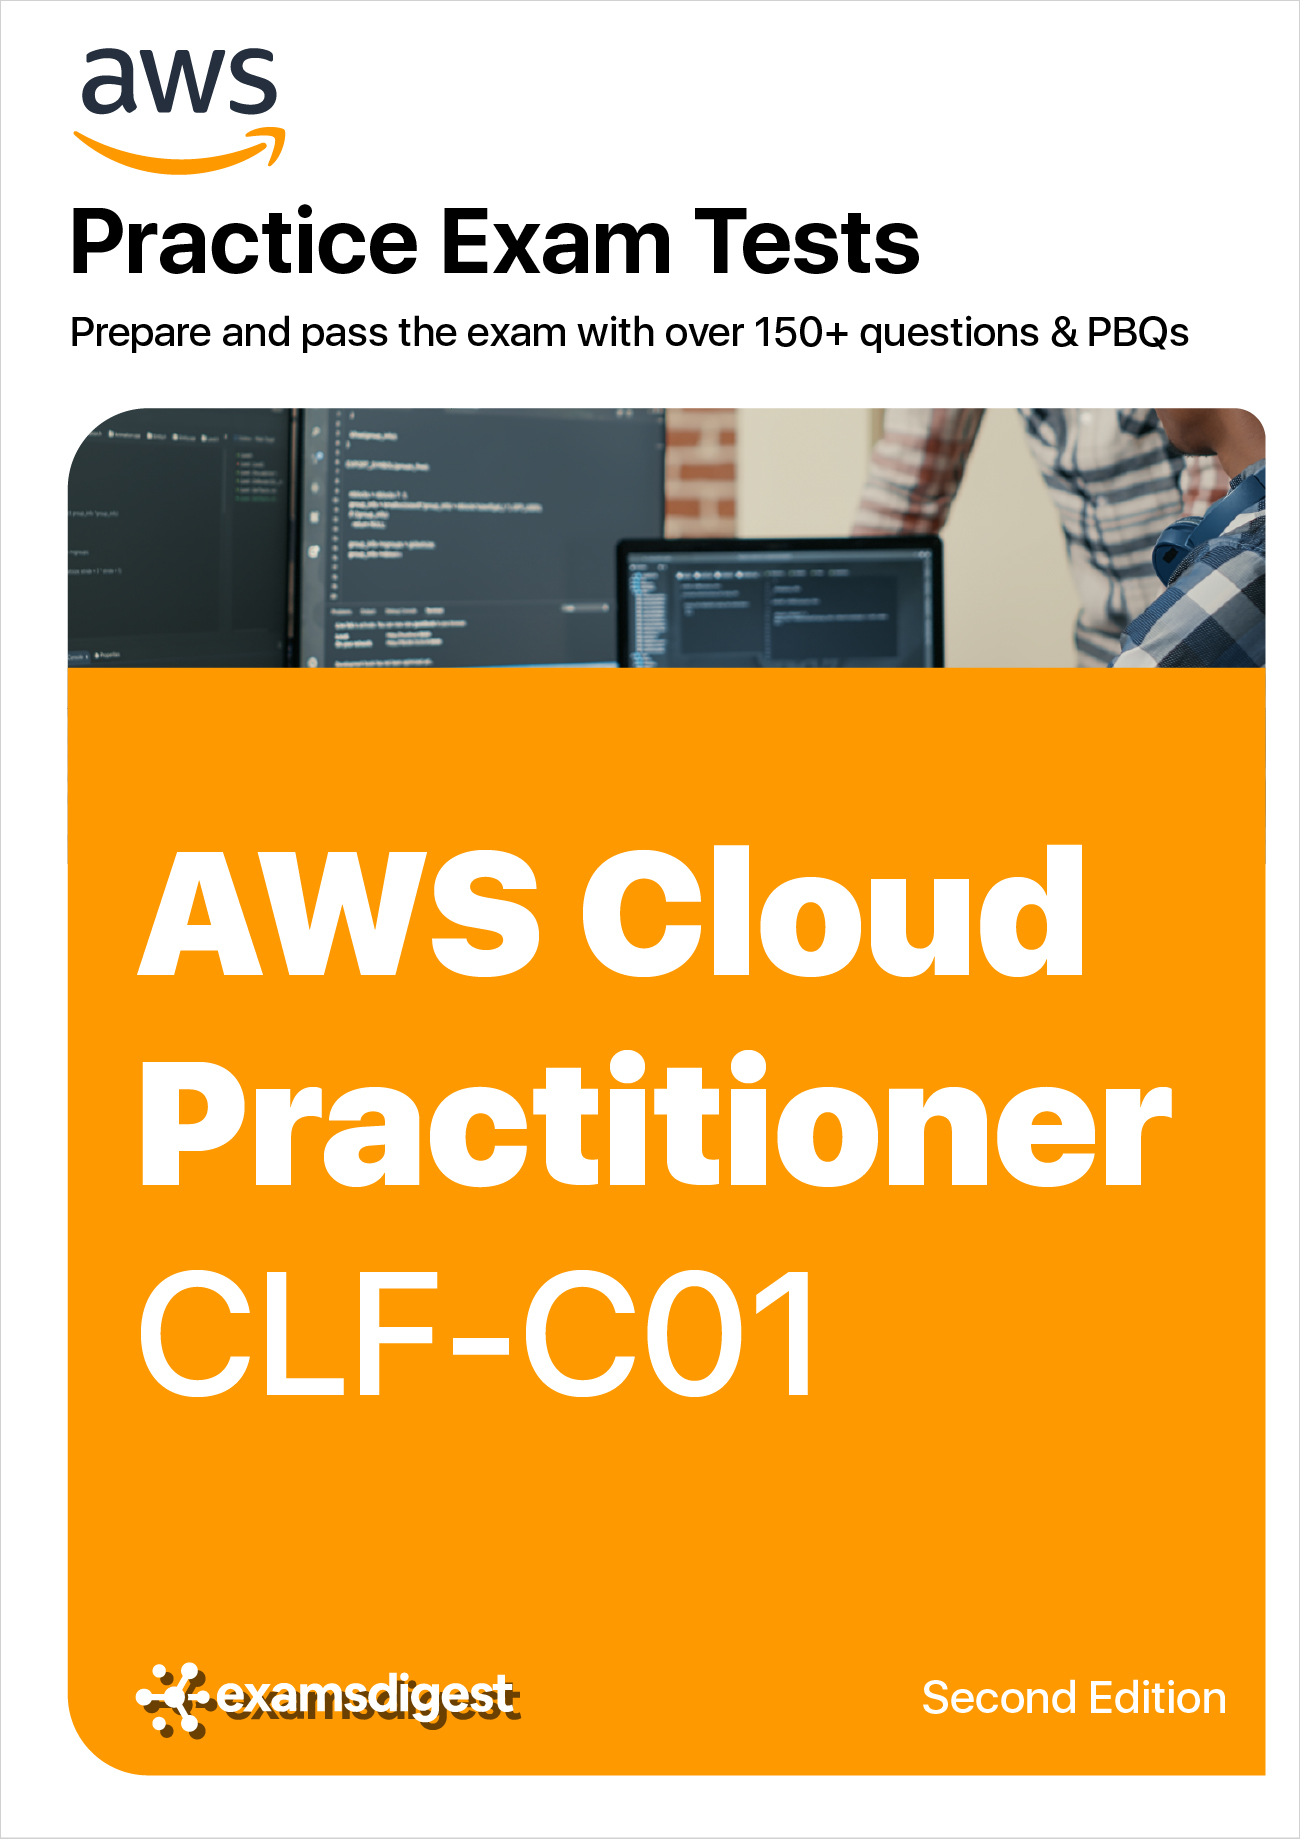 AWS-CLF-C01-practice-exam-tests-and-study-guide